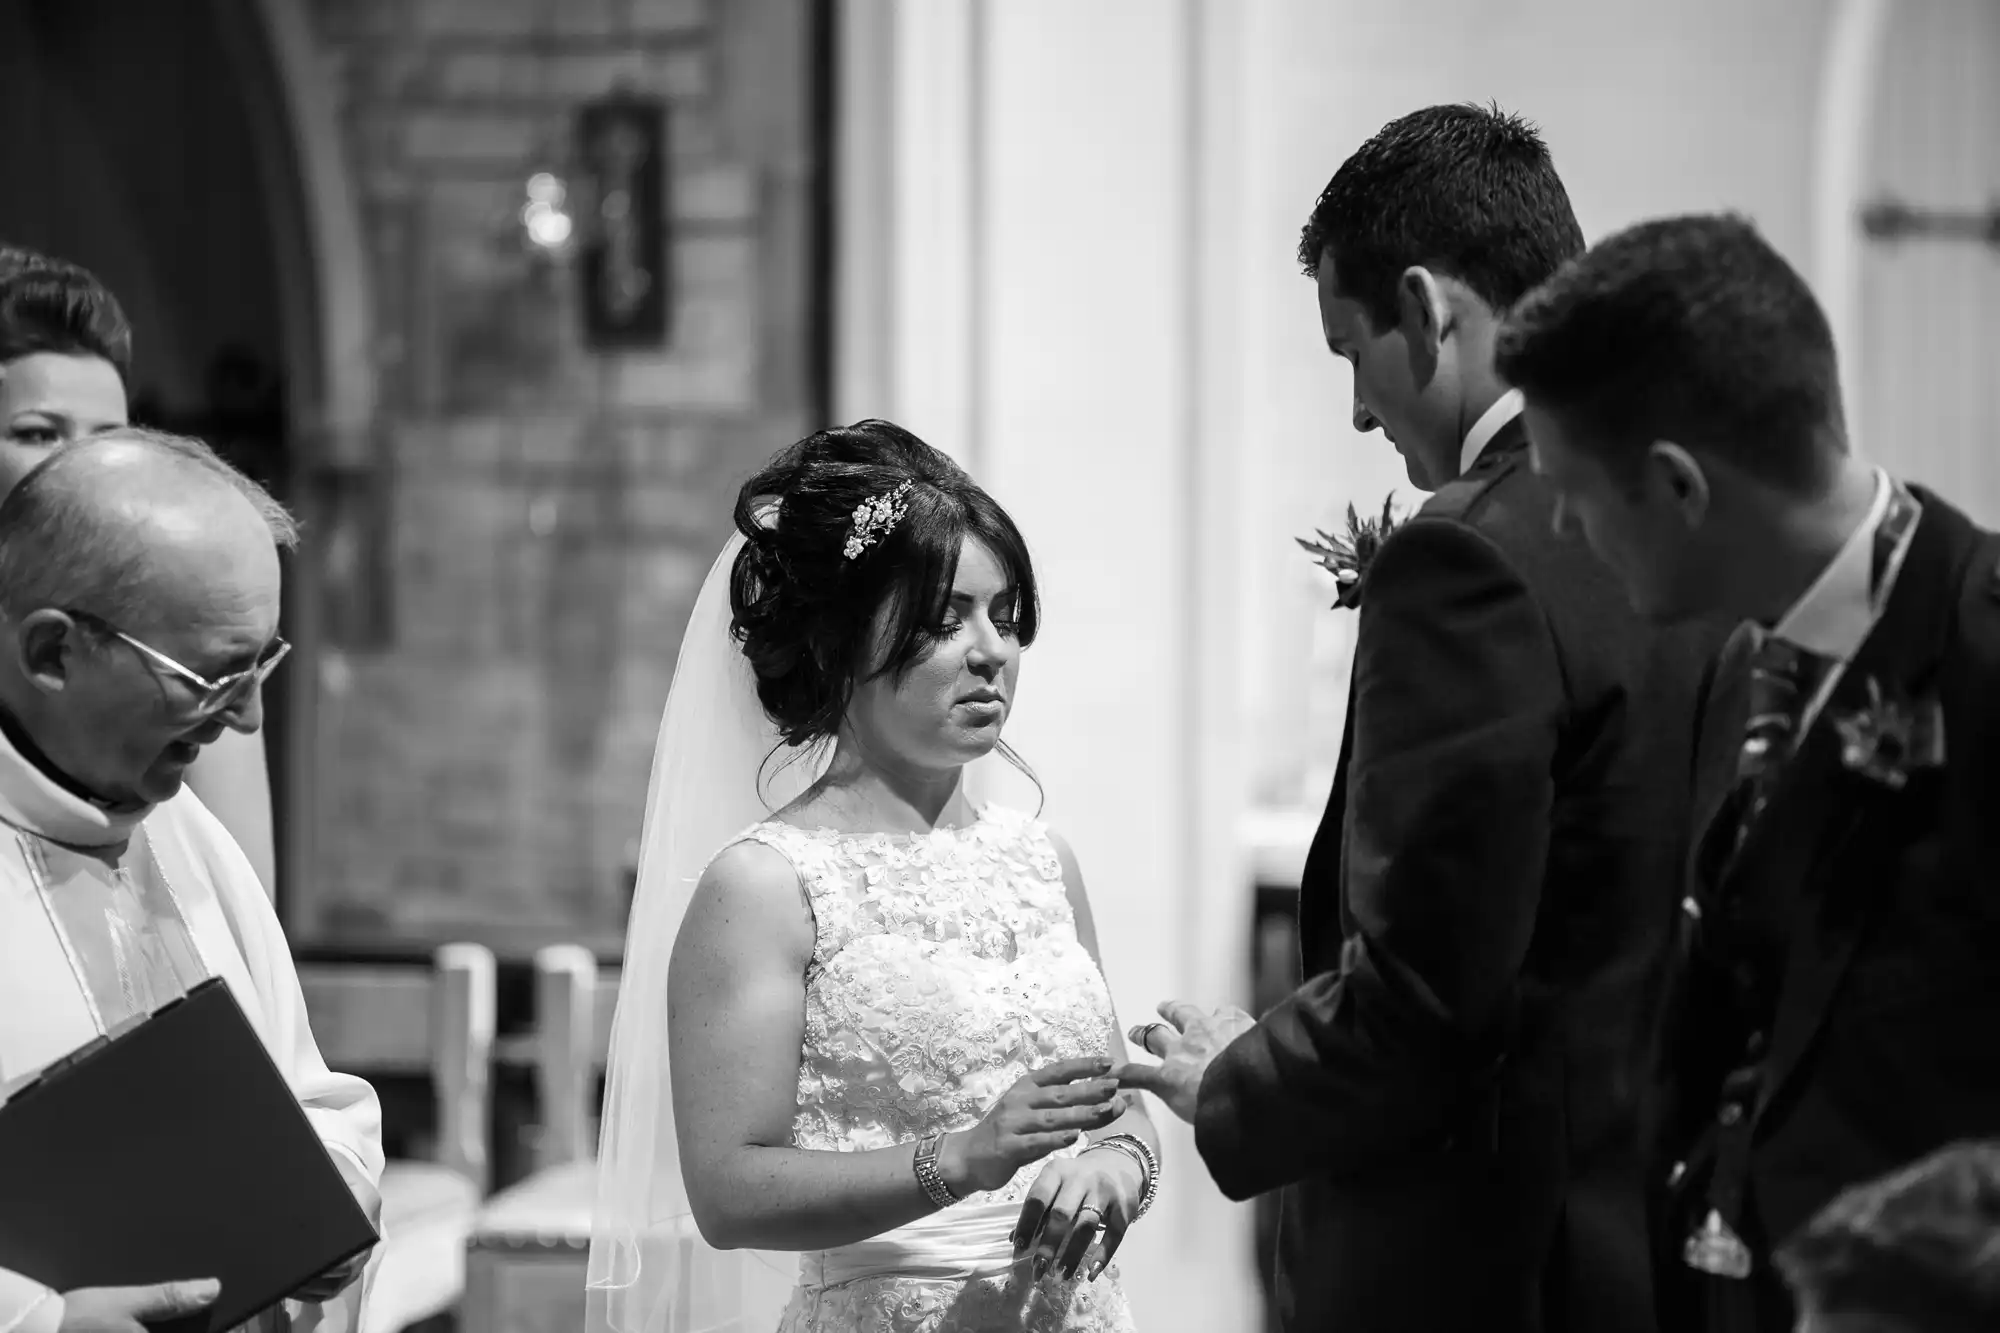 A bride and groom exchange rings during their wedding ceremony, officiated by a priest, inside a church. black and white image capturing a solemn yet joyful moment.